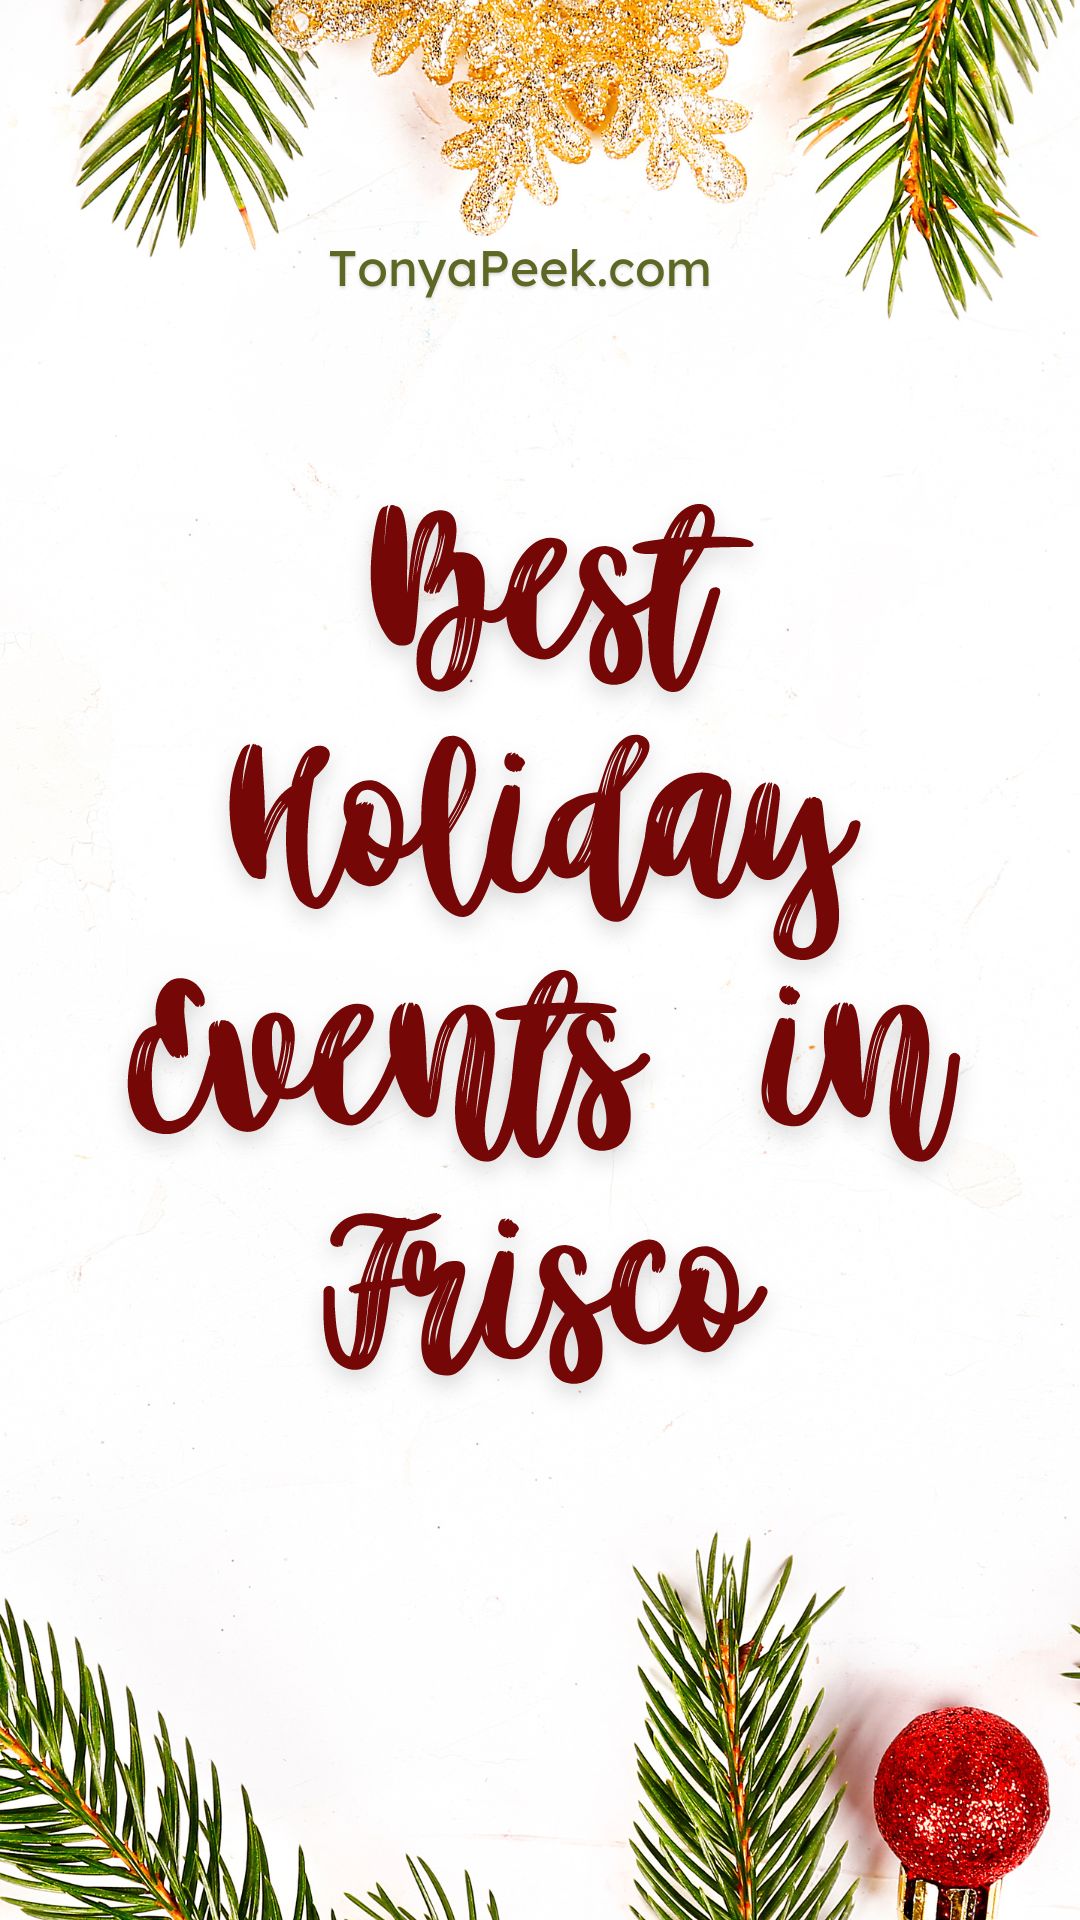 Best Holiday Events in Frisco